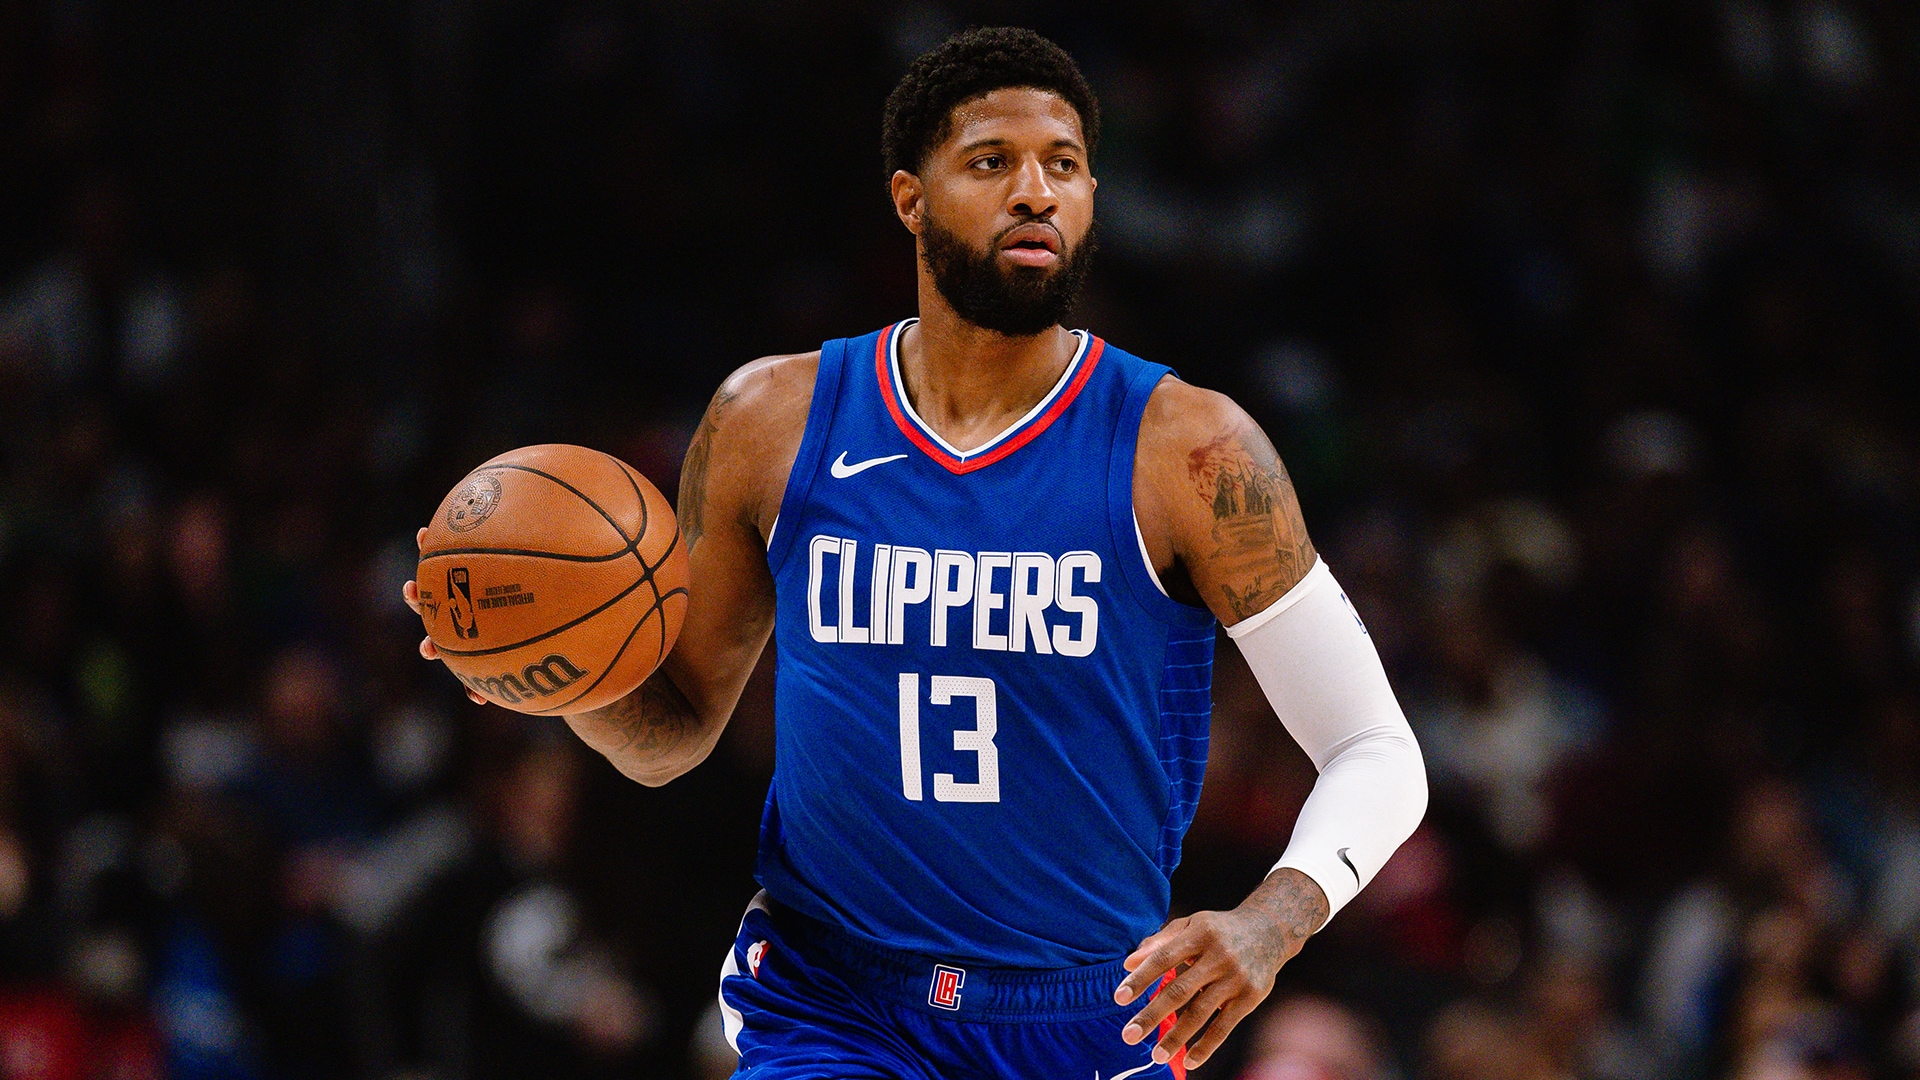 Clippers' Negotiation Tactics with Paul George A Risky Gamble That Could Backfire